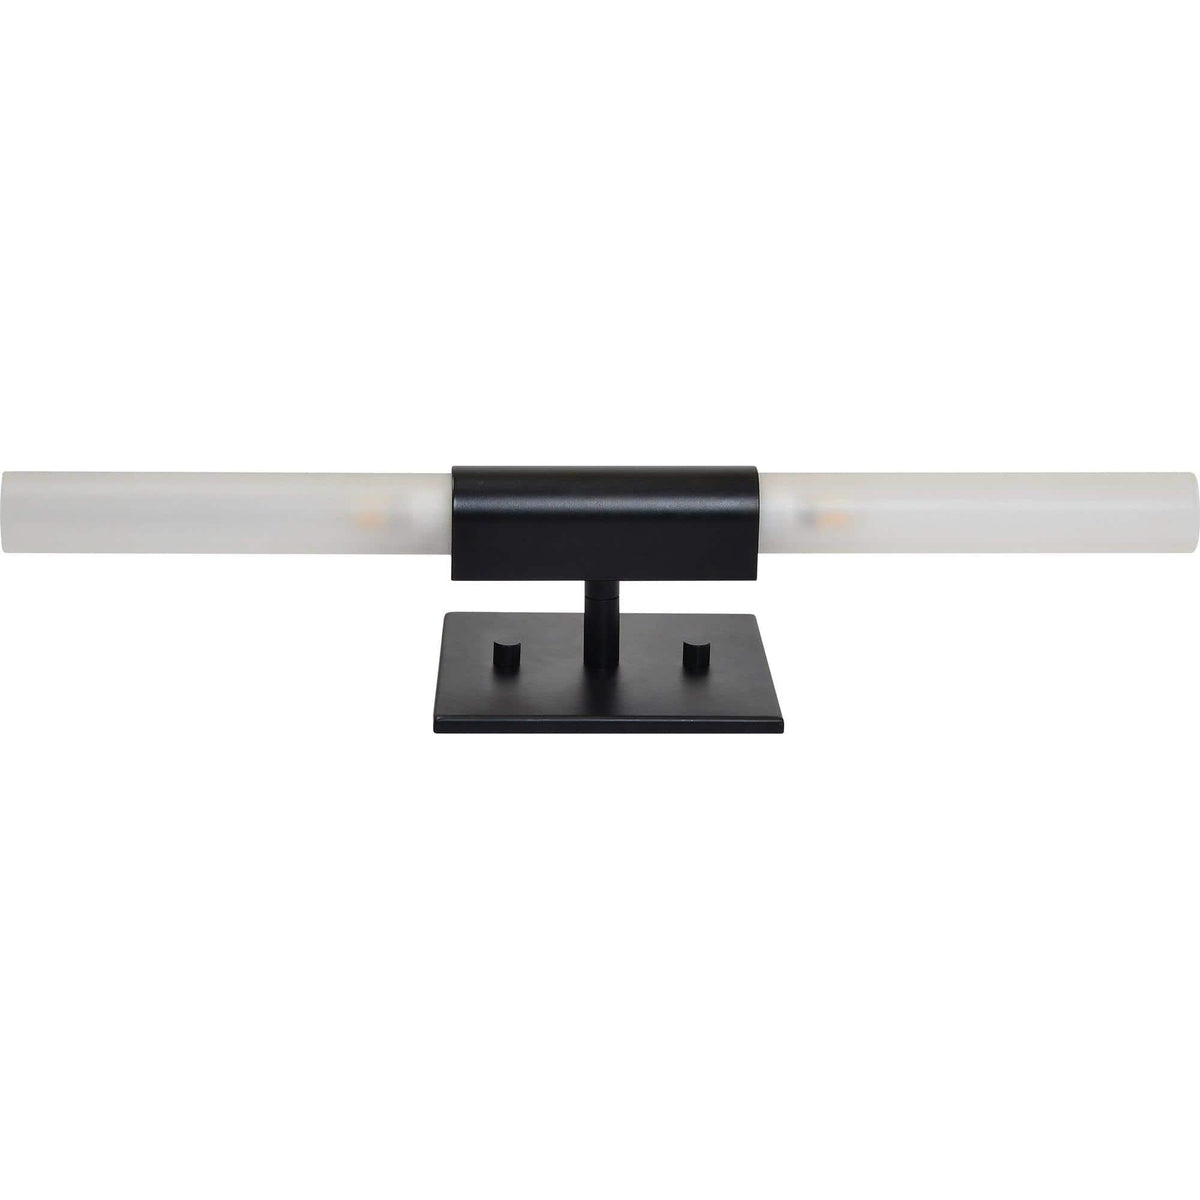 Renwil - Lina Wall Sconce - WS118 | Montreal Lighting & Hardware